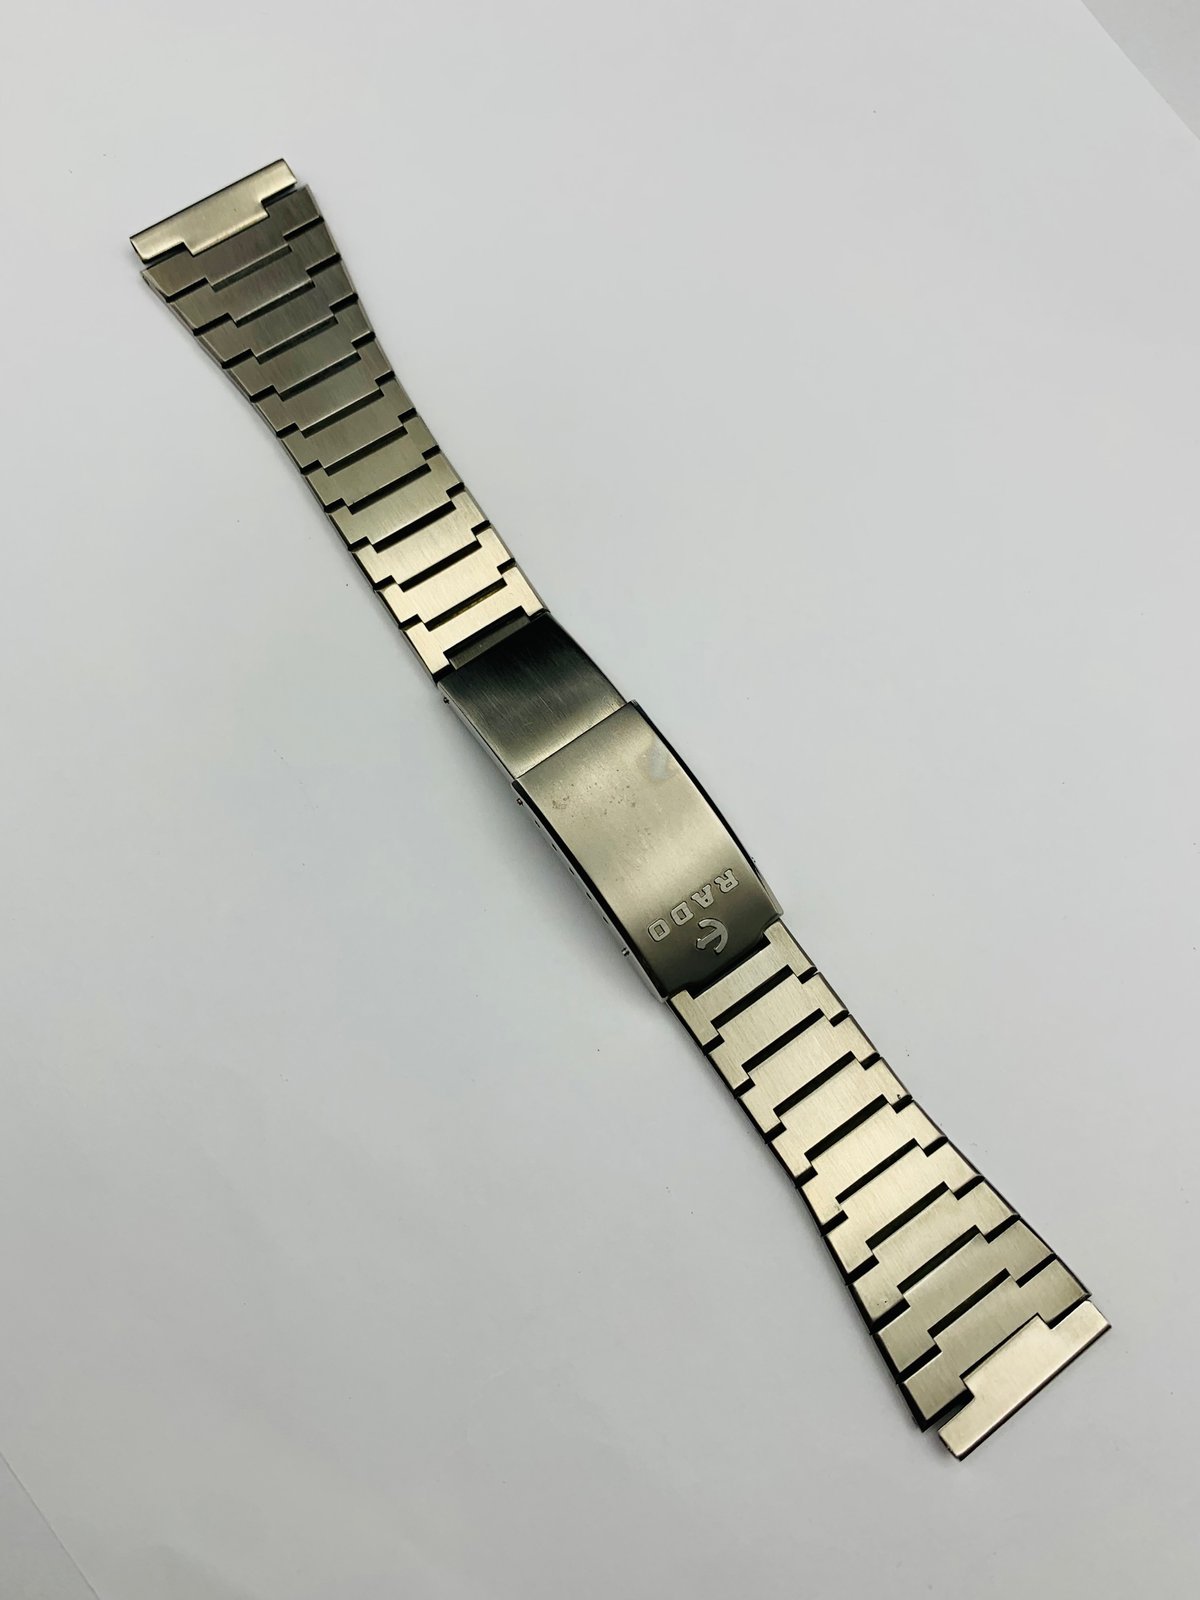 High Quality Ceramic Watch Strap For Rado Genuine Series Black And White  Ceramic Watch Chain For Men And Women Watchband 21mm